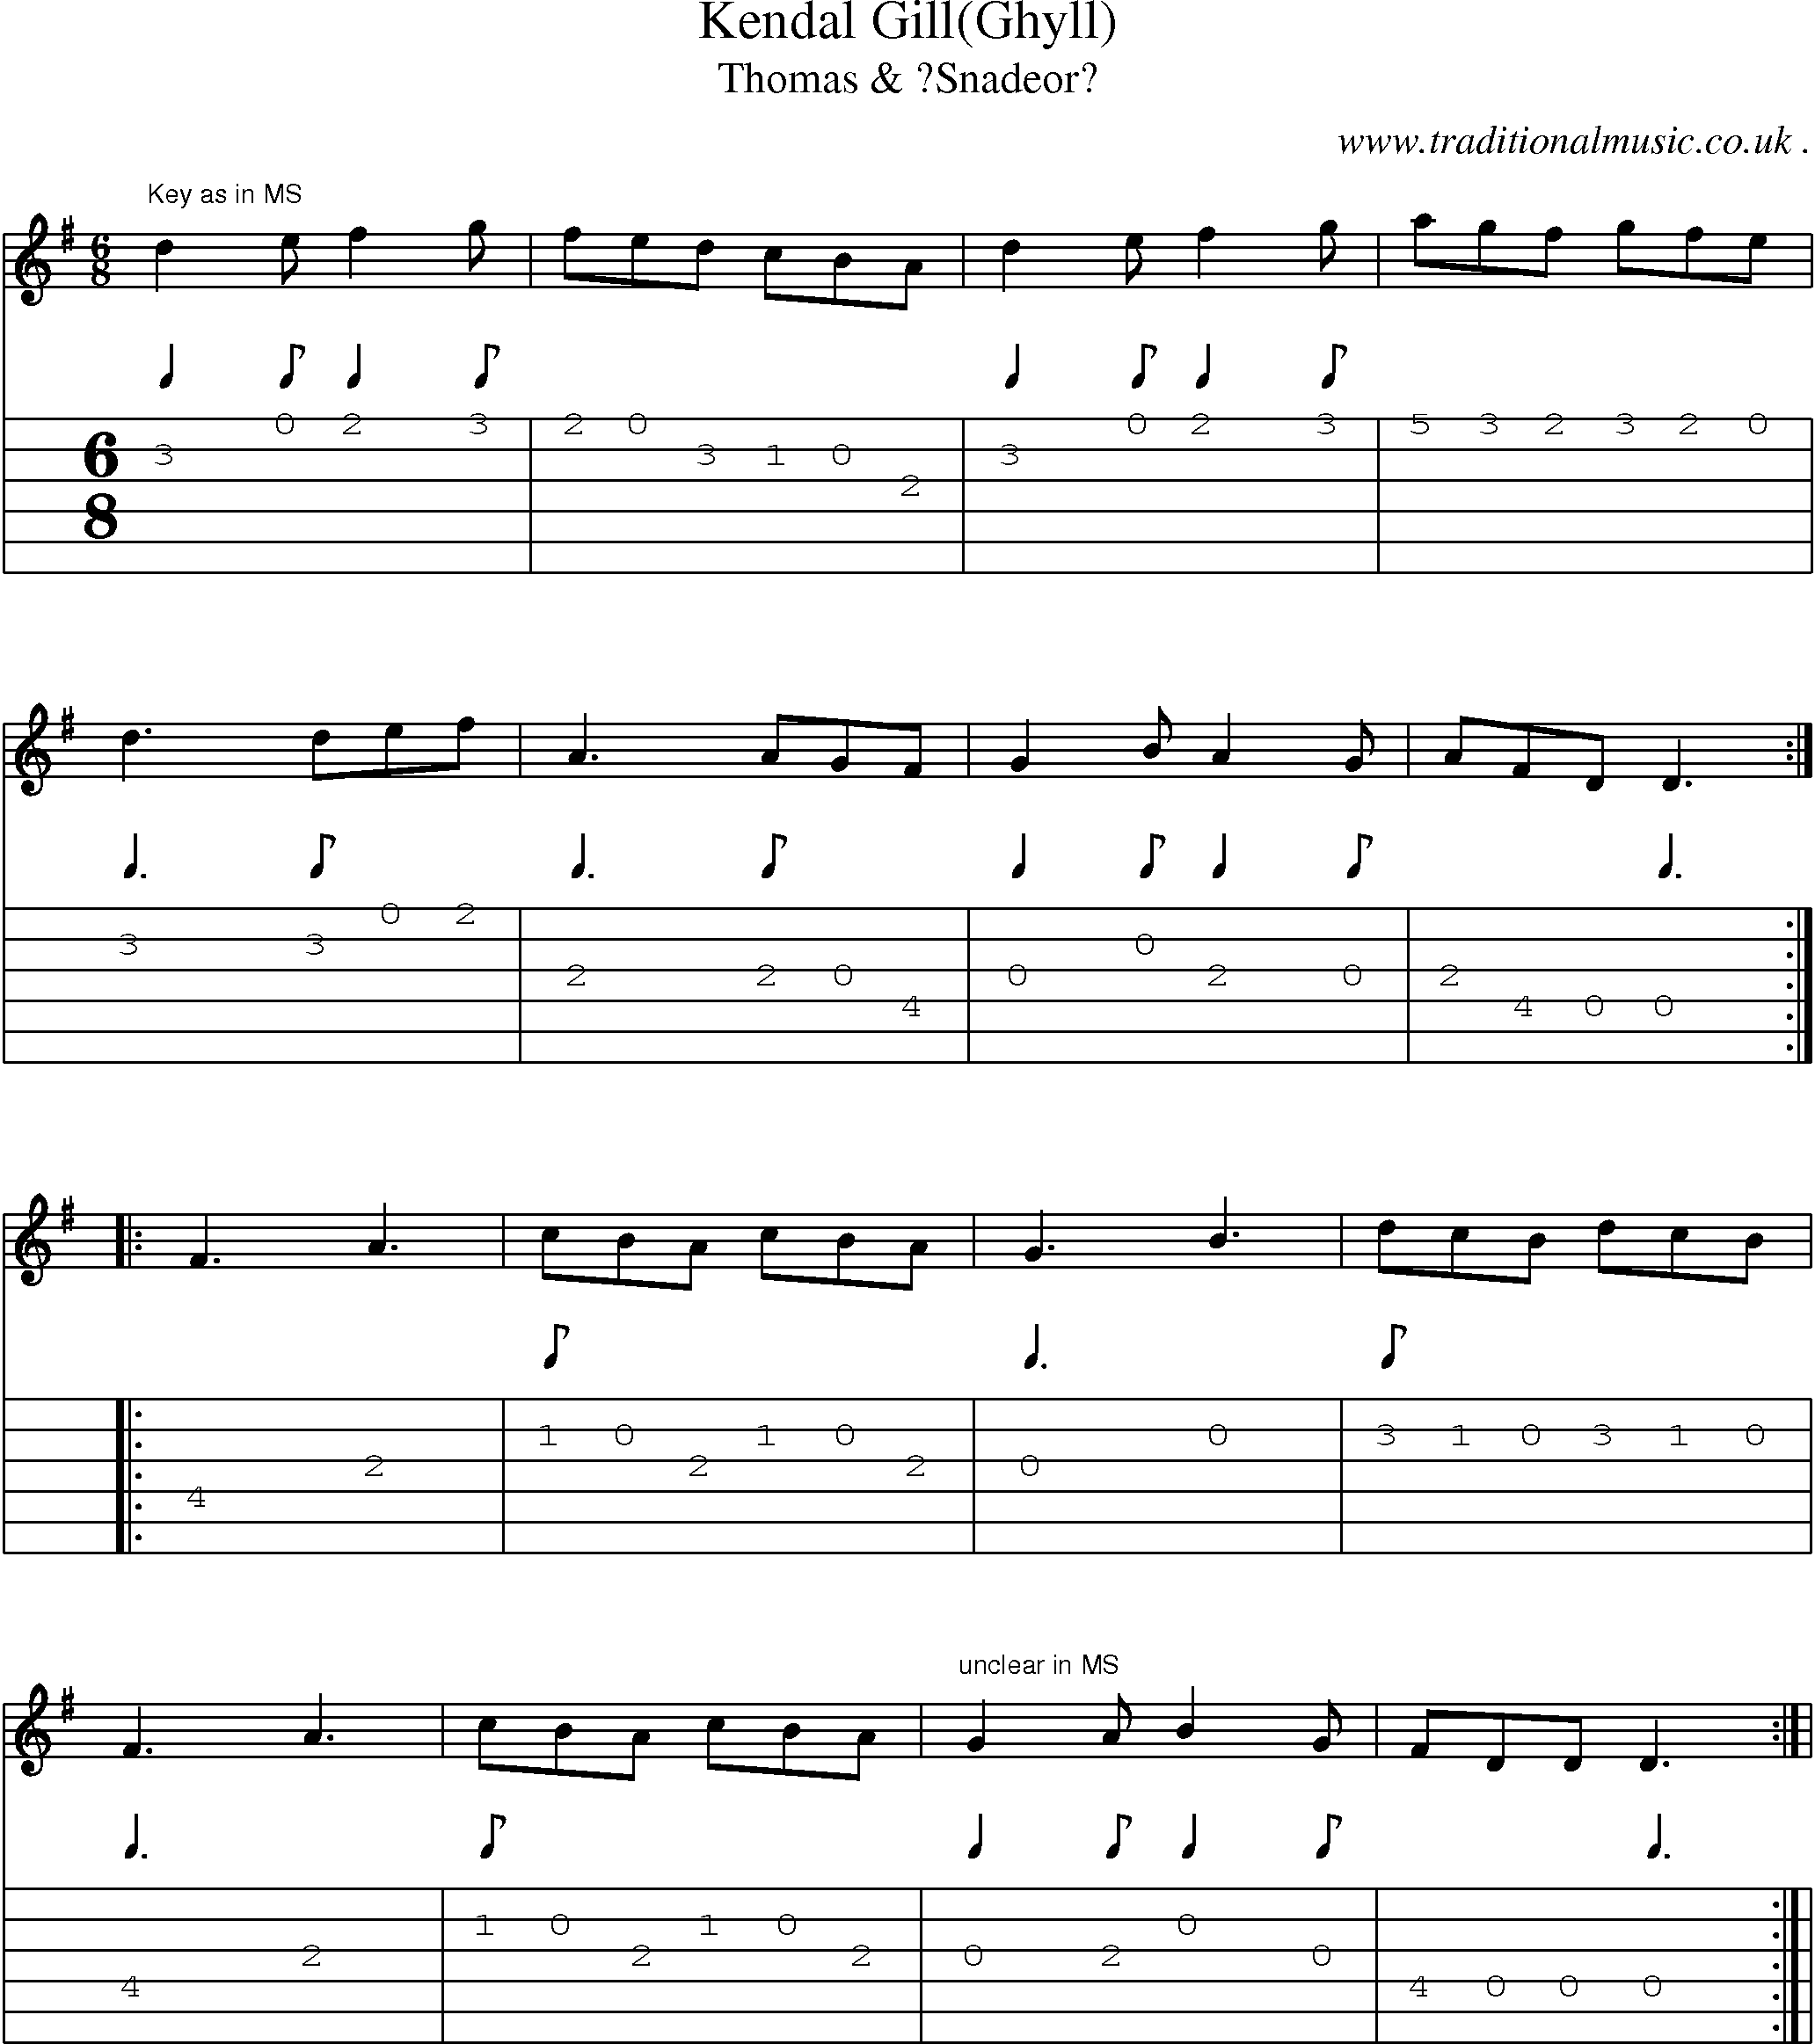 Sheet-Music and Guitar Tabs for Kendal Gill(ghyll)